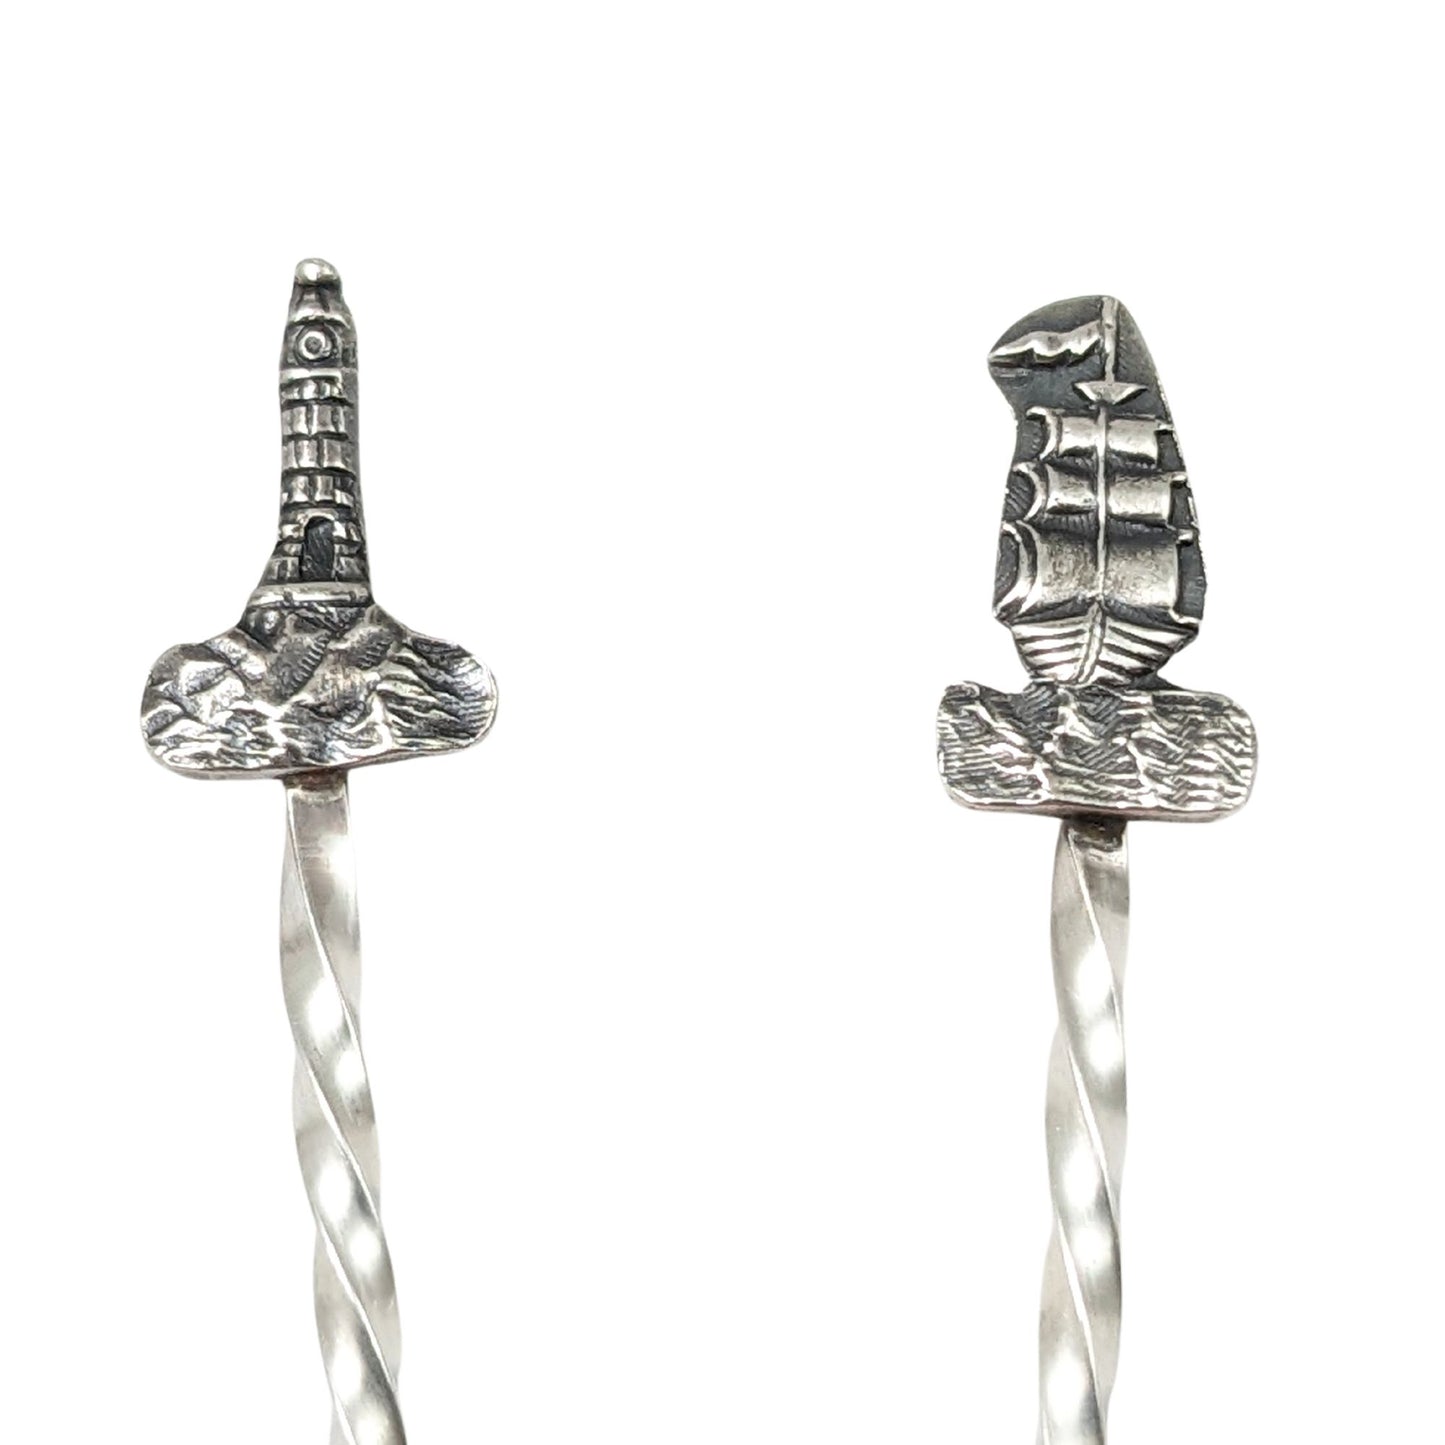 Pair of sterling silver cocktail picks. One has a lighthouse on top, the other has a tall ship.